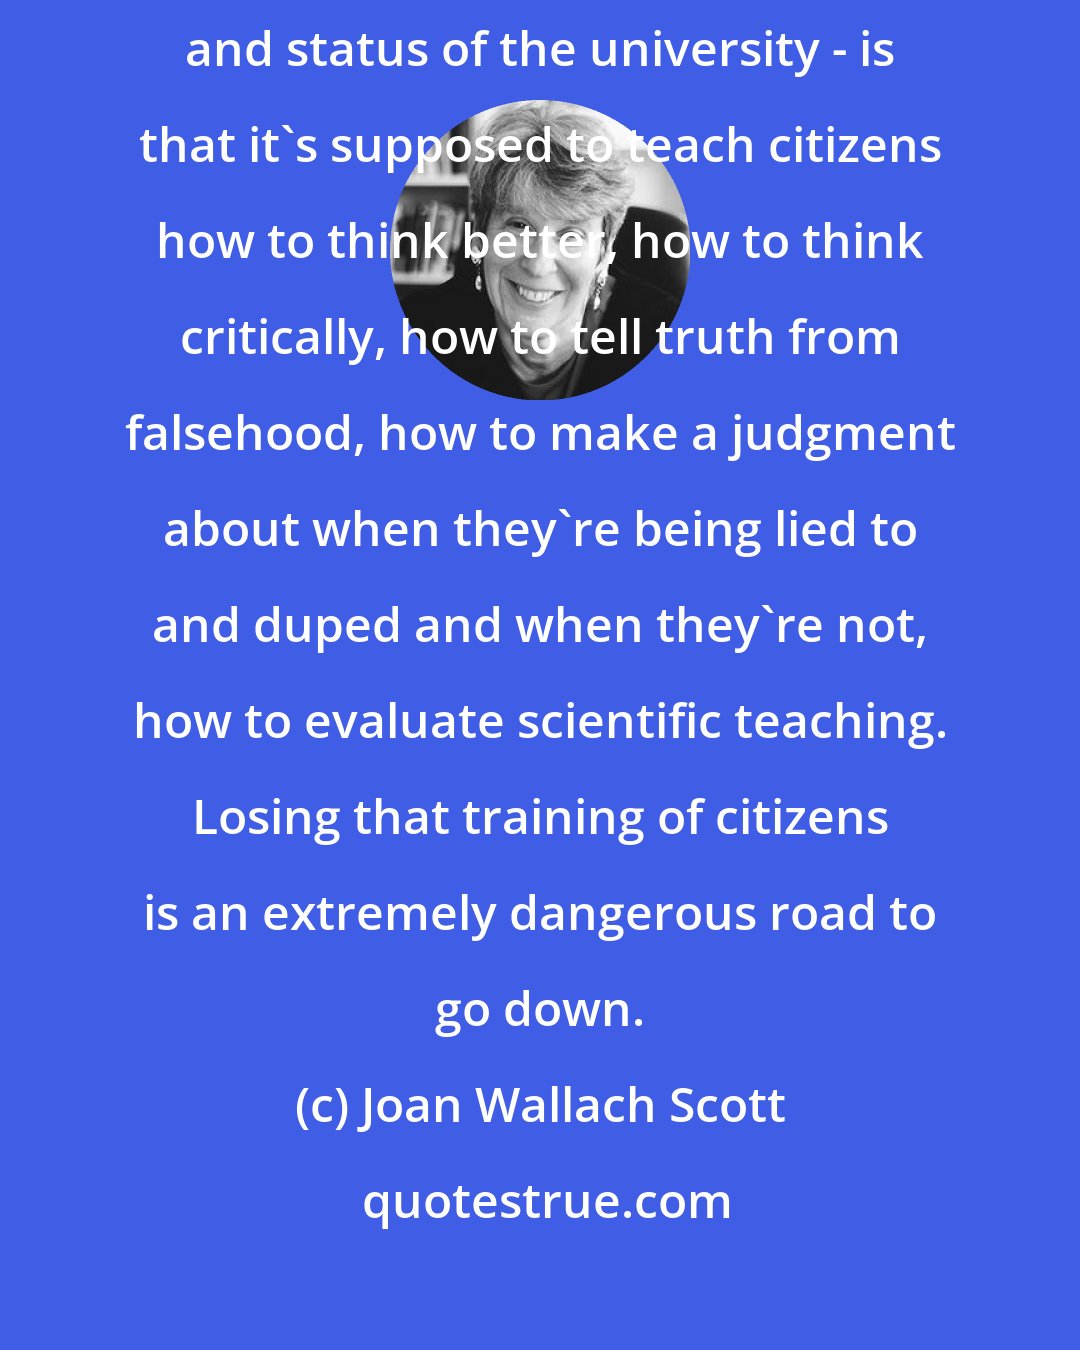 Joan Wallach Scott: The thing about education - and why I'm so passionate about the position and status of the university - is that it's supposed to teach citizens how to think better, how to think critically, how to tell truth from falsehood, how to make a judgment about when they're being lied to and duped and when they're not, how to evaluate scientific teaching. Losing that training of citizens is an extremely dangerous road to go down.